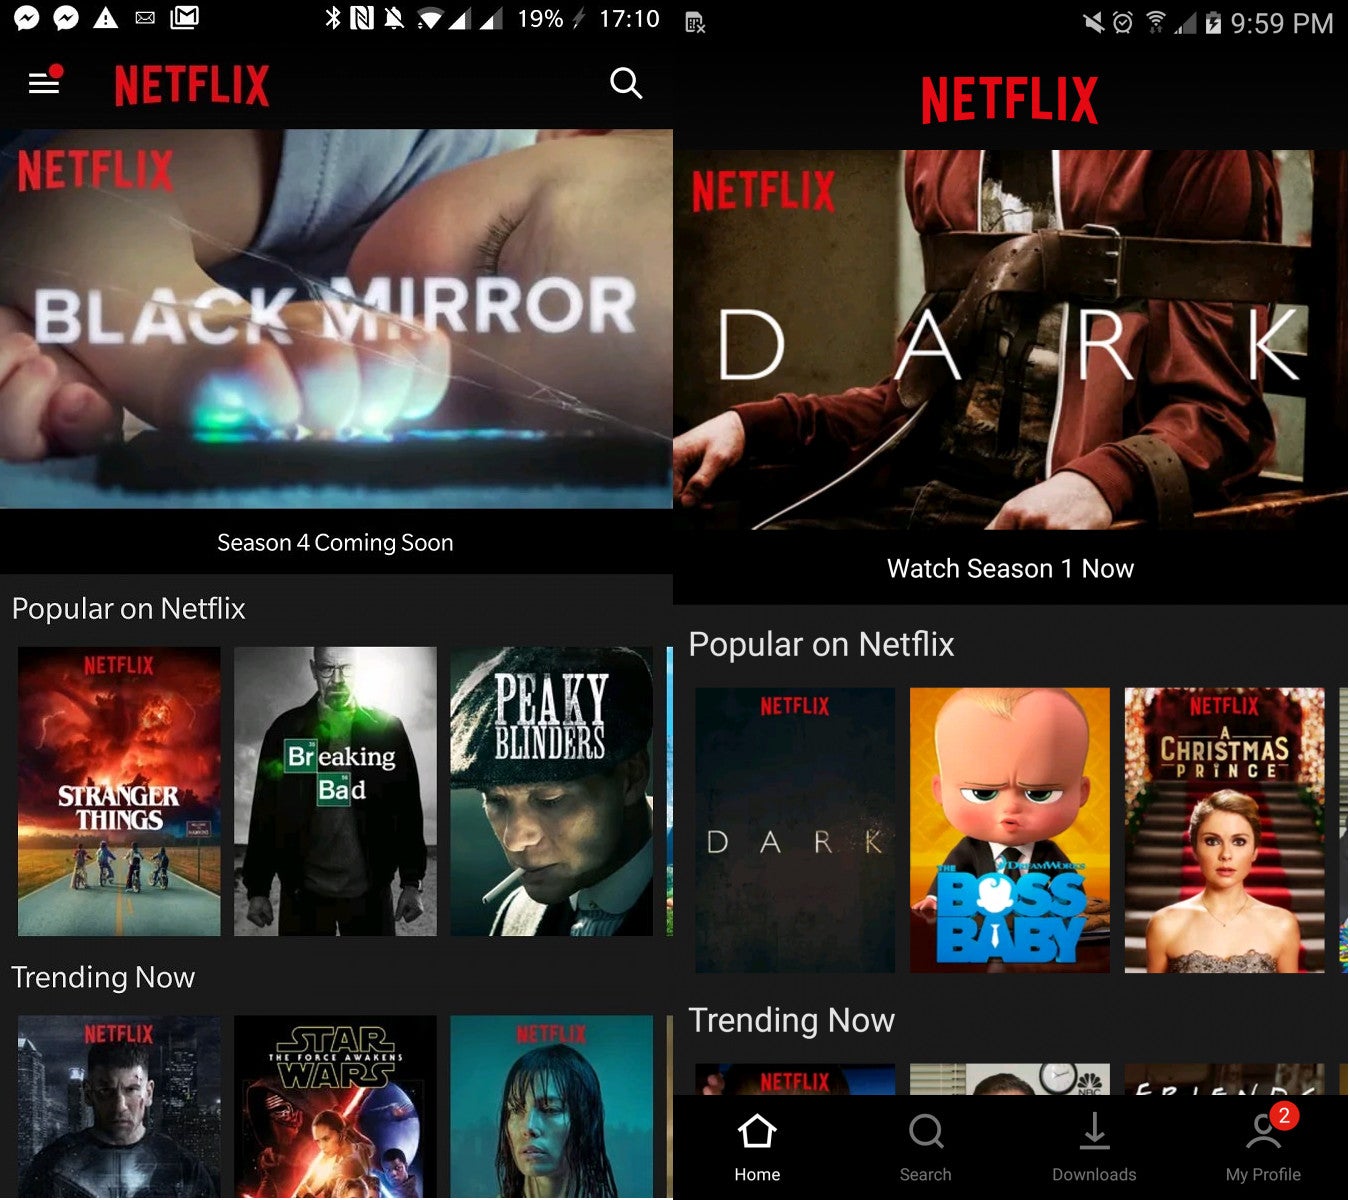 Old Netflix app vs New, redesigned Netflix UI - Netflix currently testing redesigned Android app, expect an update soon